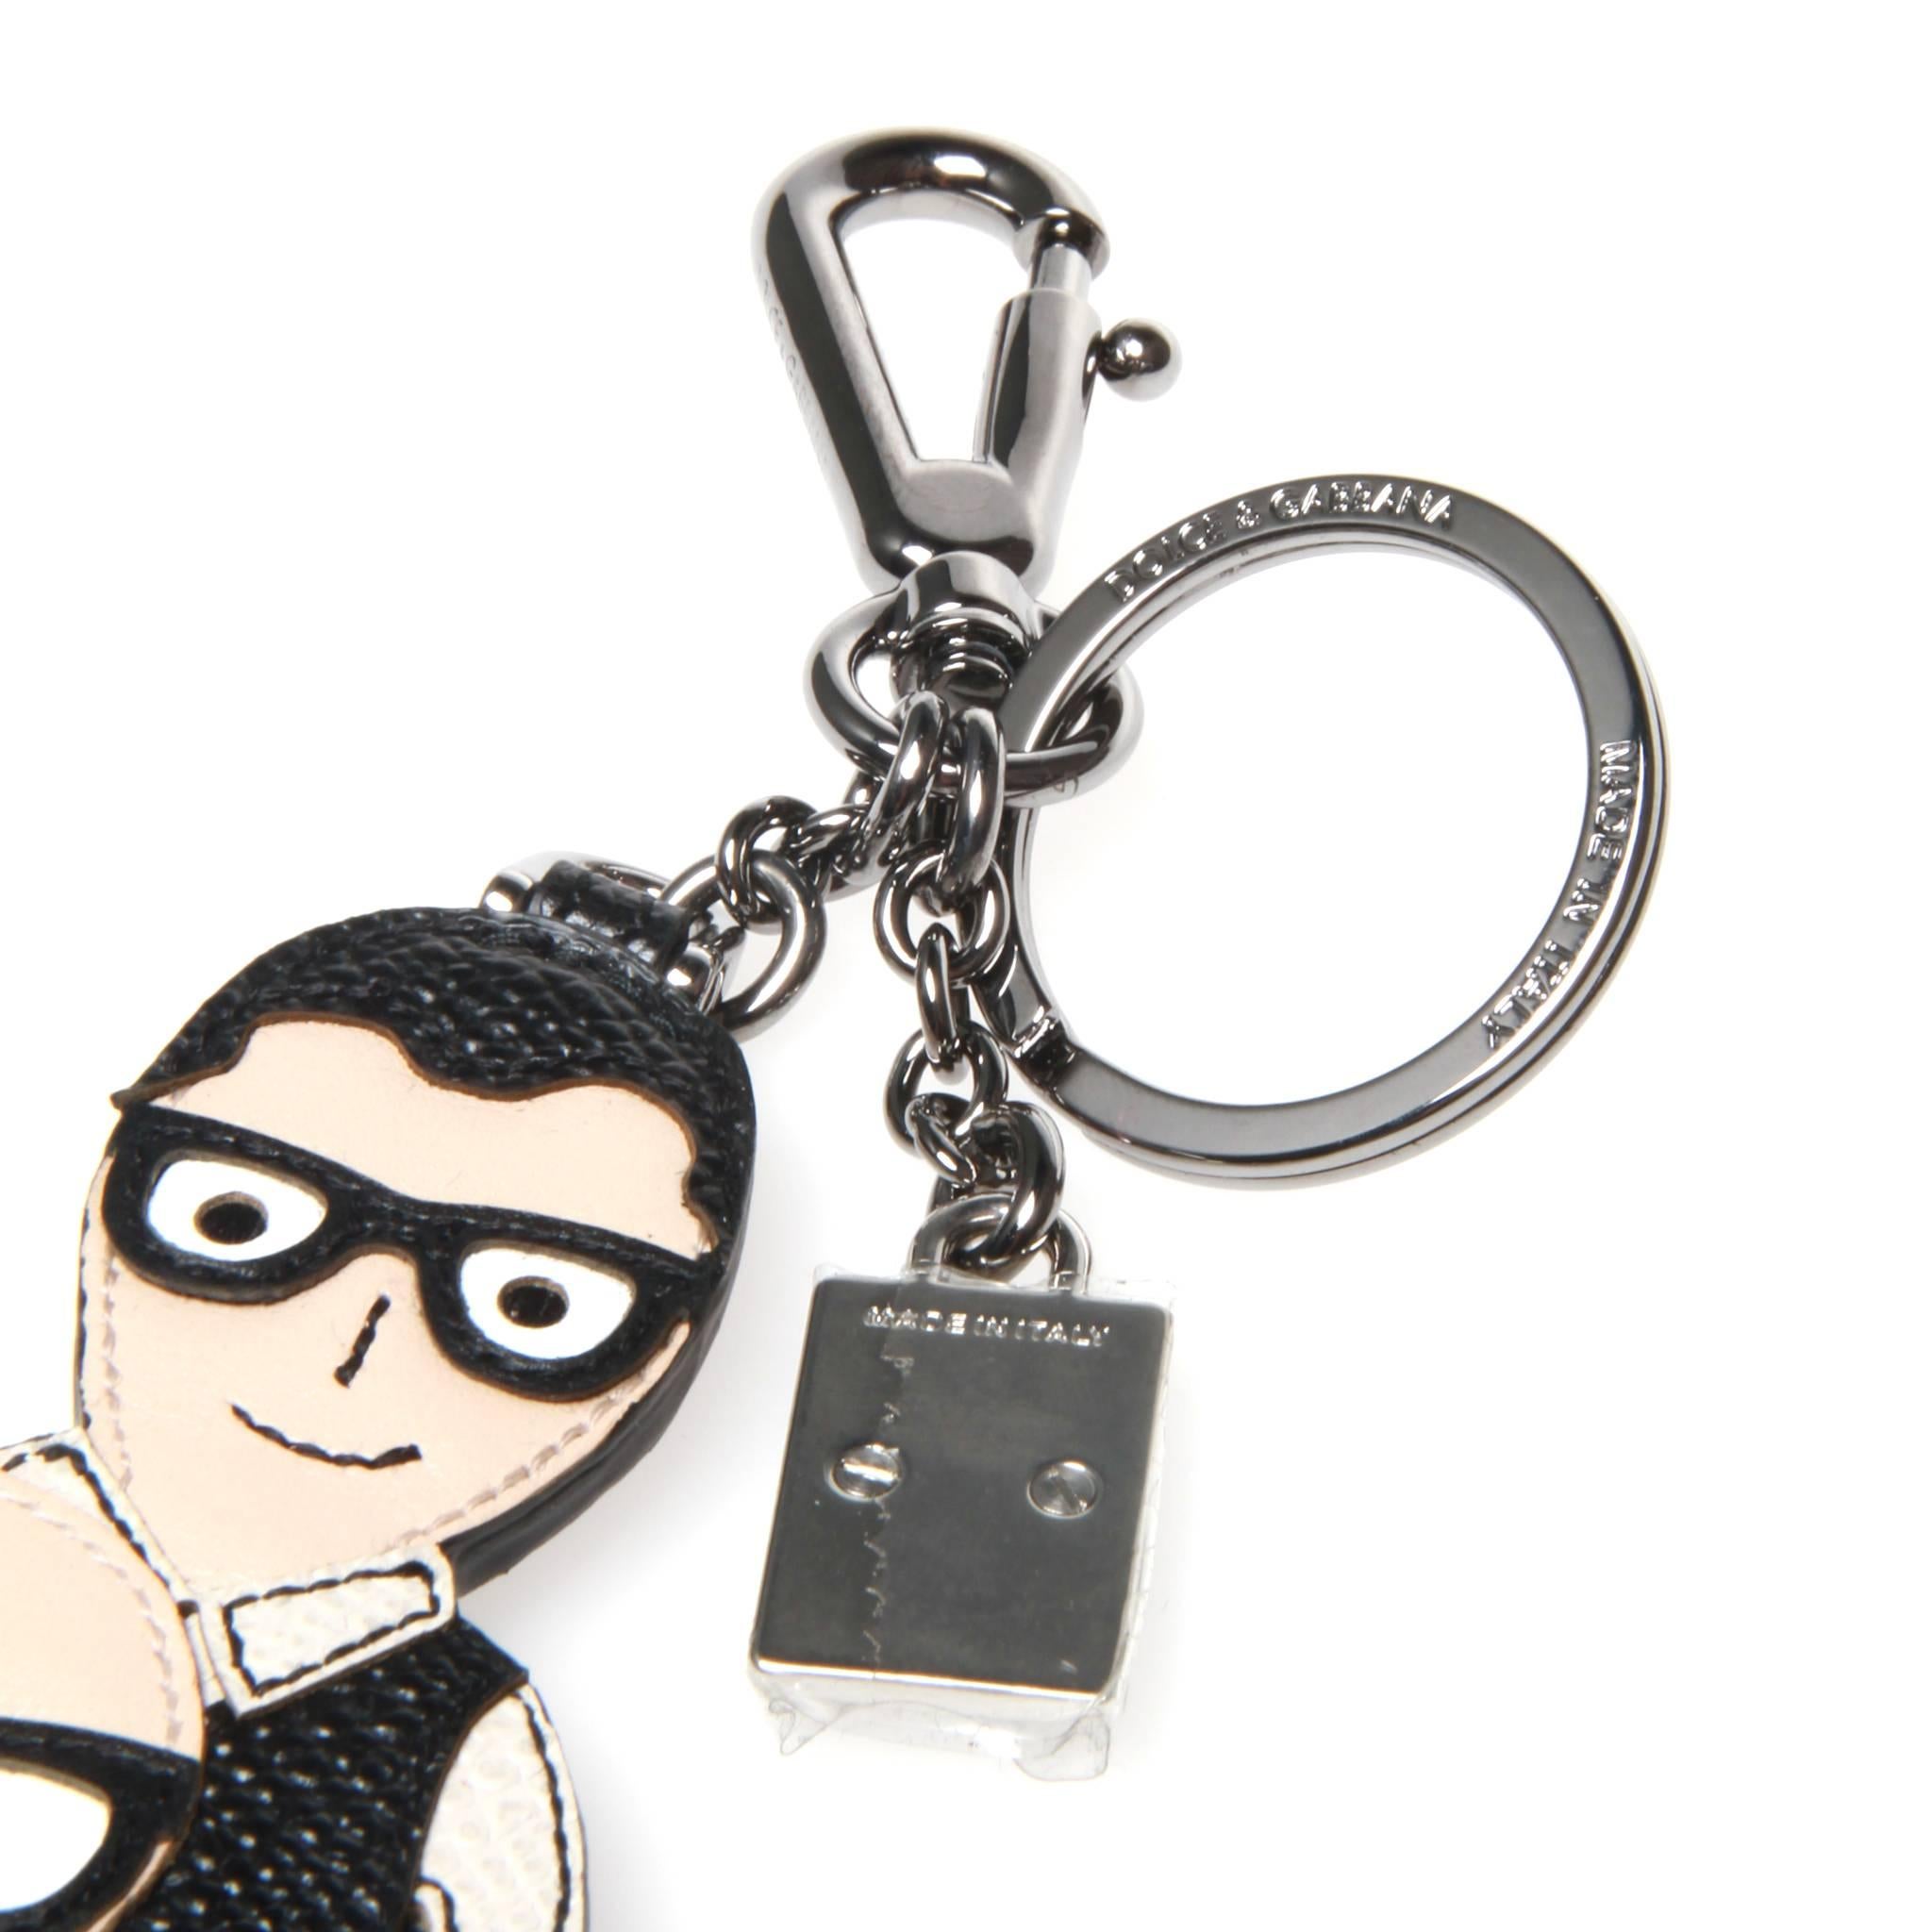 Dolce and Gabbana key ring featuring dauphine calf leather graphic and accented with silver-tone metal clasp and ring with two-tone brand plaque. 

Made in Italy.